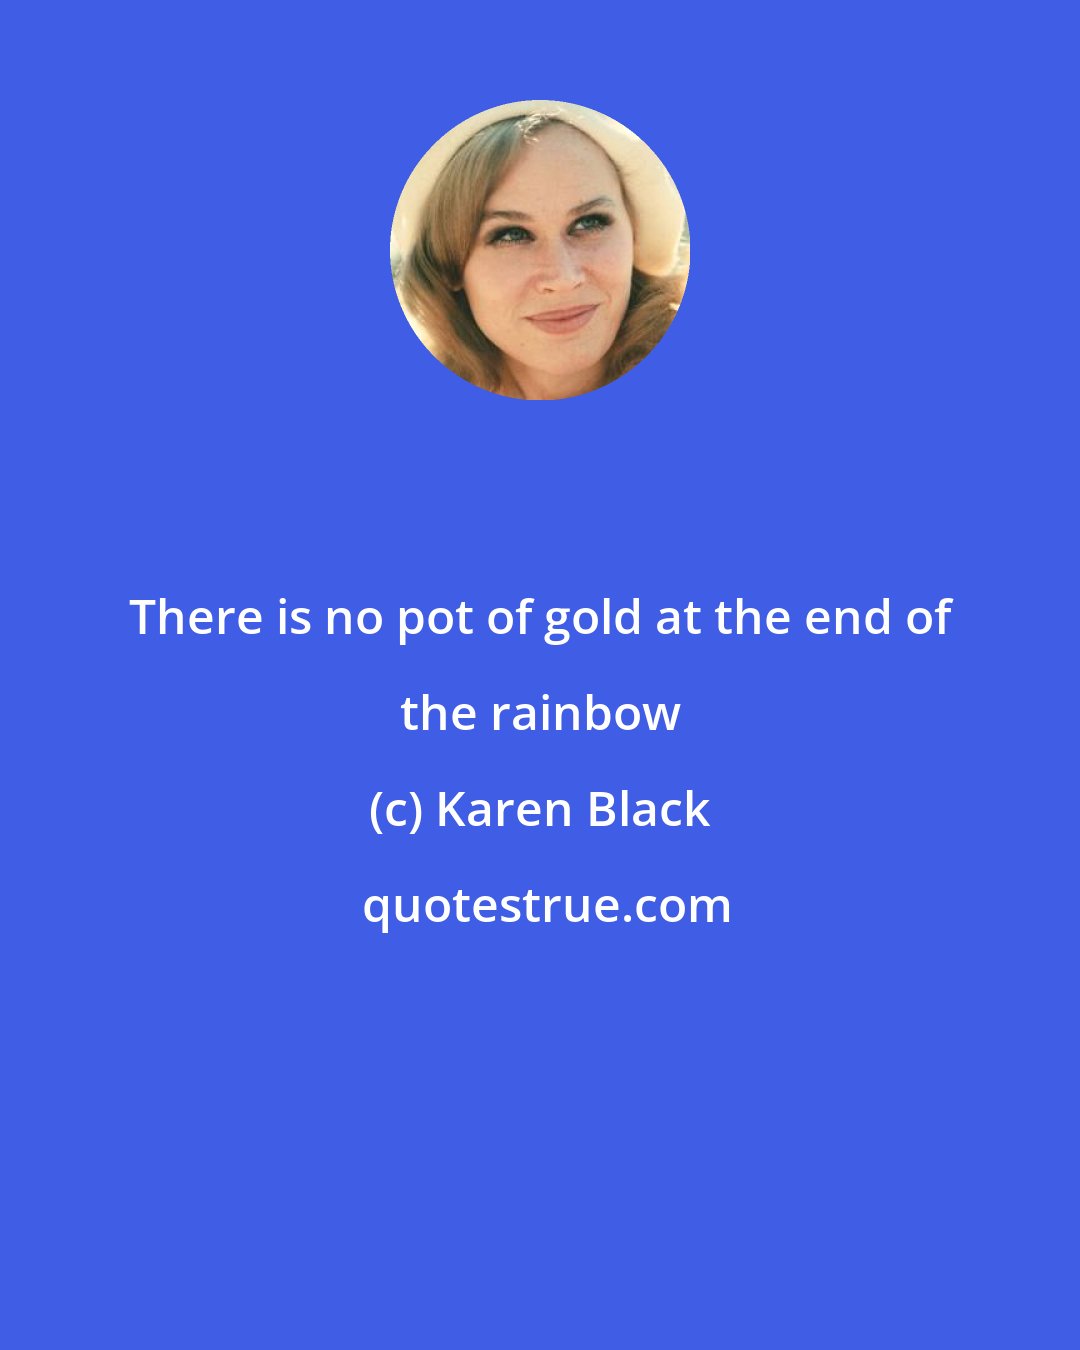 Karen Black: There is no pot of gold at the end of the rainbow